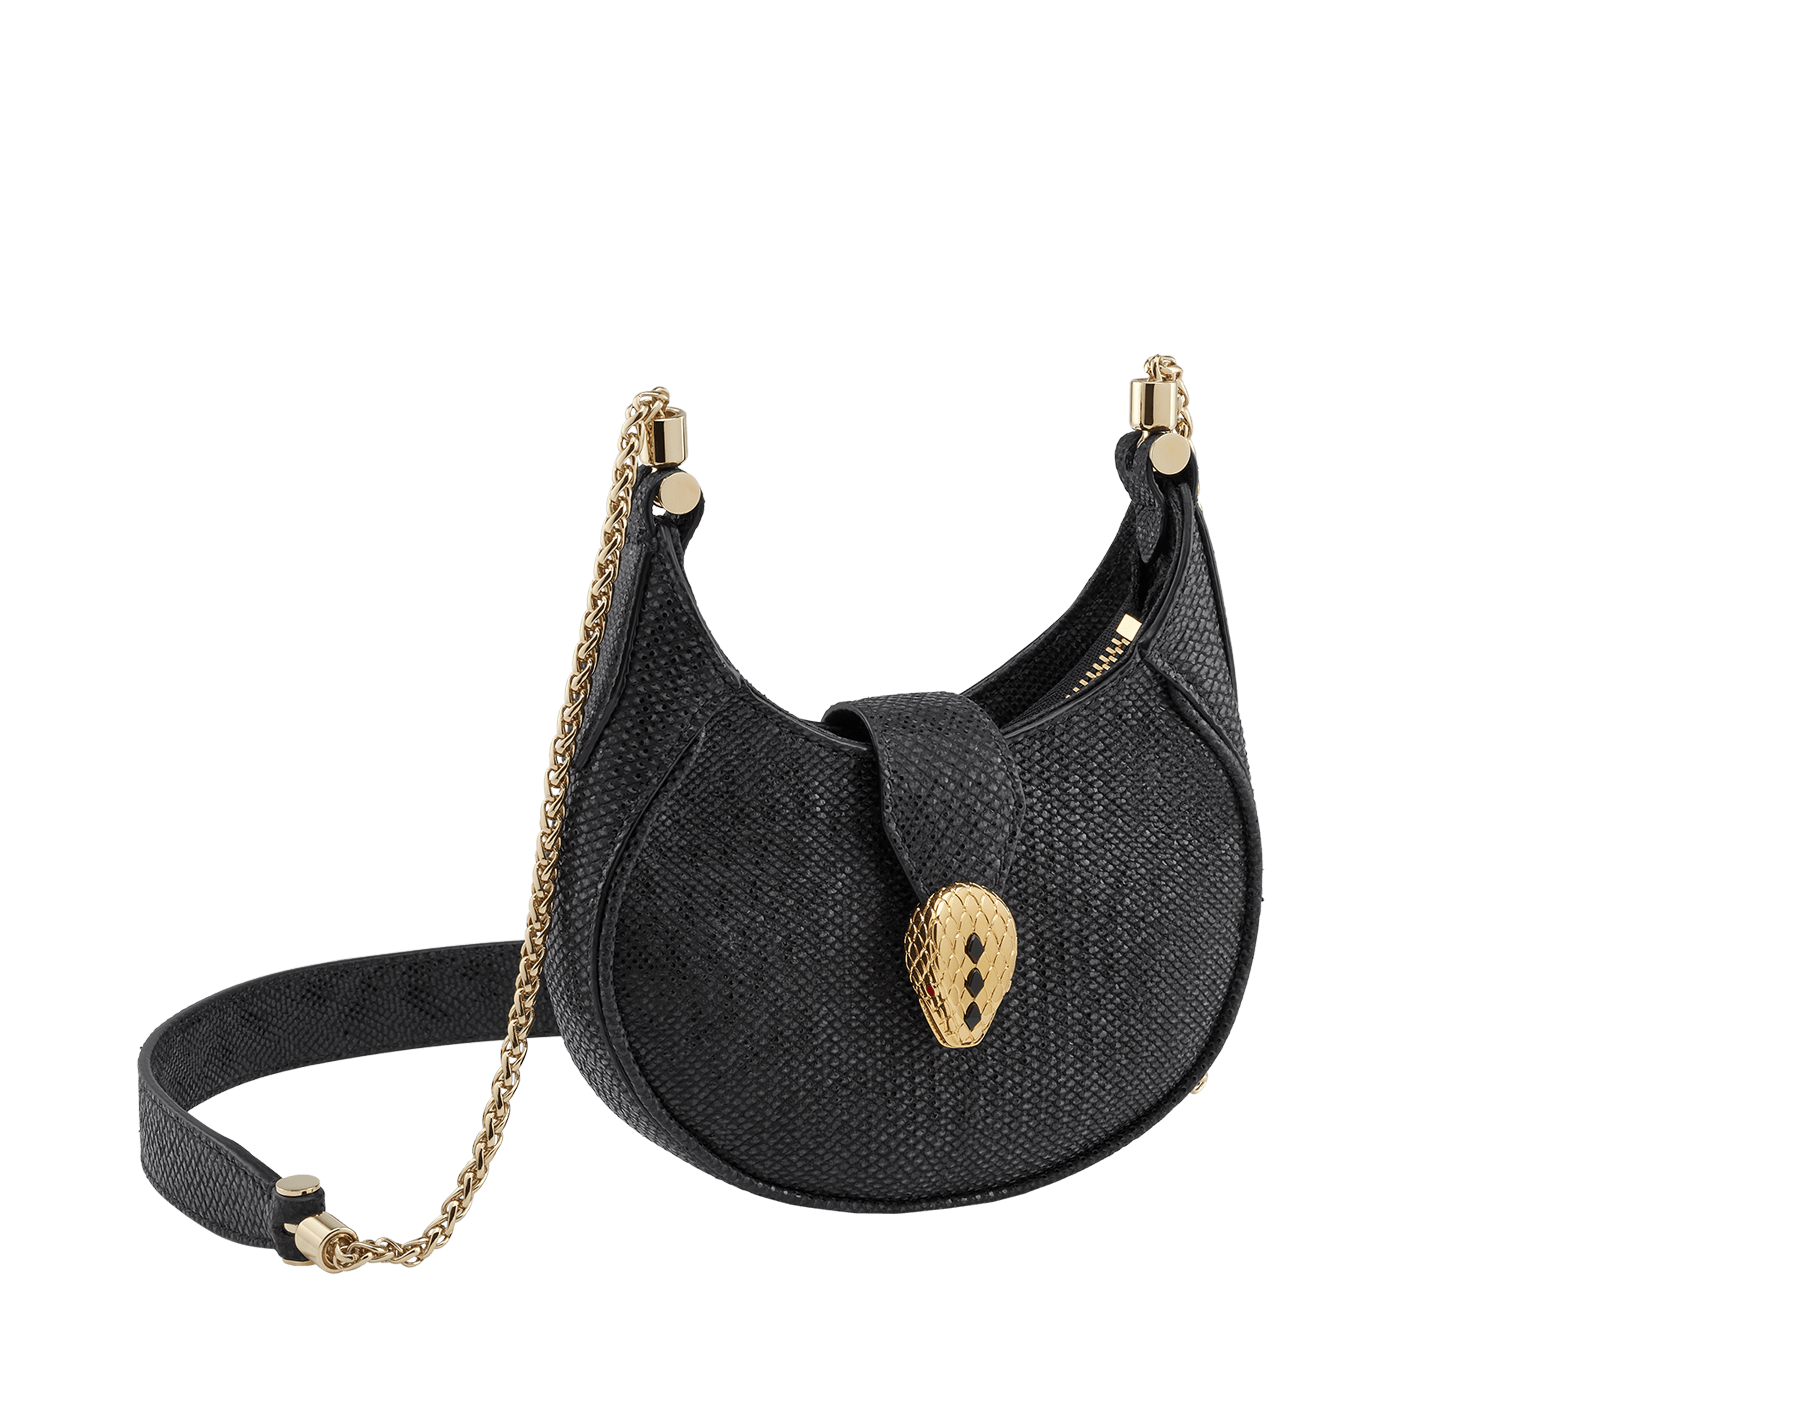 Serpenti Ellipse micro crossbody bag in moon silver black metallic karung skin with black nappa leather lining. Captivating snakehead closure in gold-plated brass embellished with red enamel eyes. SEA-MICROHOBOa image 1